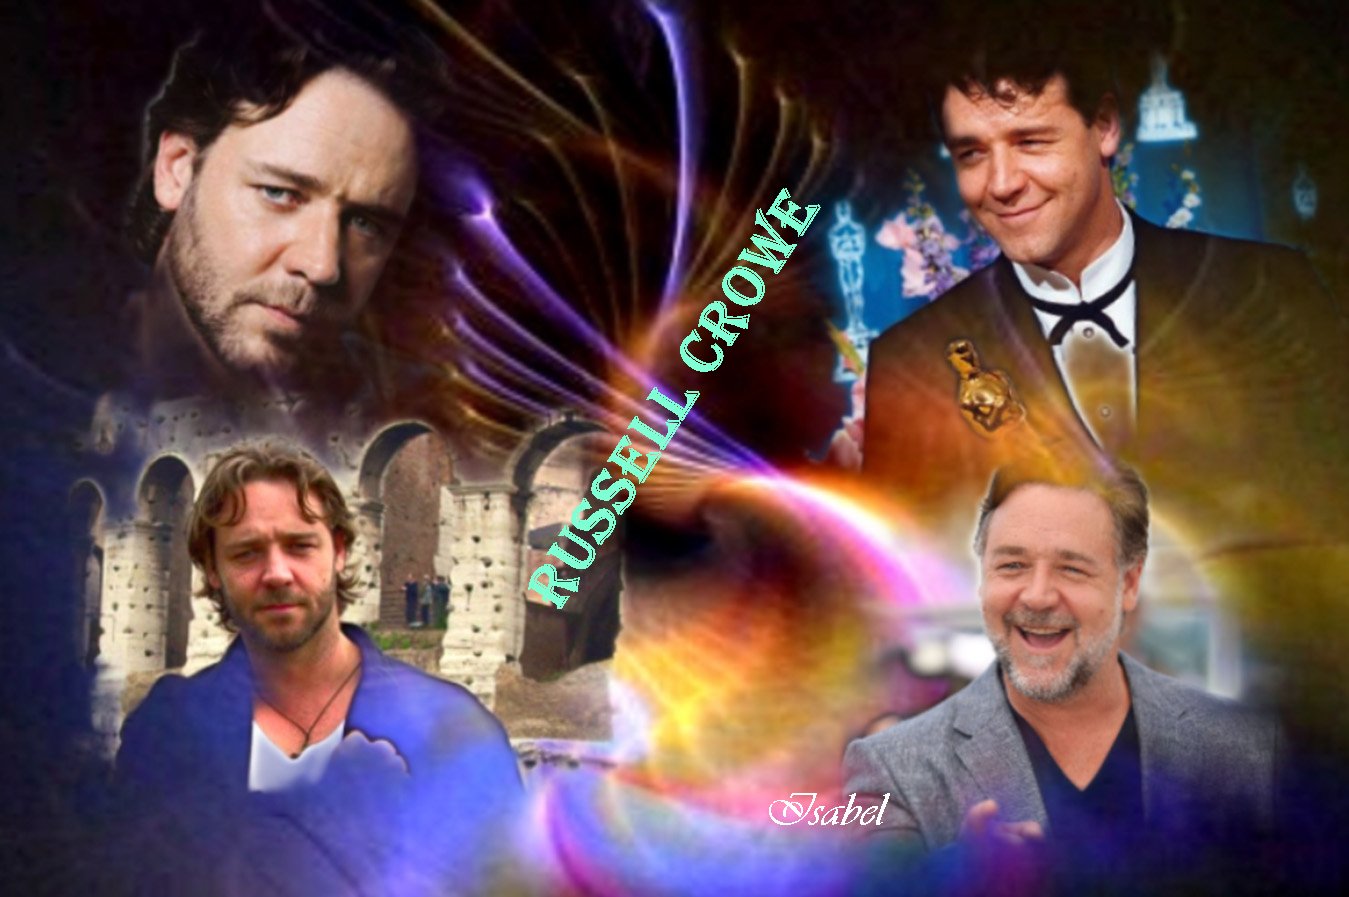 Happy 55th birthday, my admired respected and loved ...
RUSSELL  CROWE 